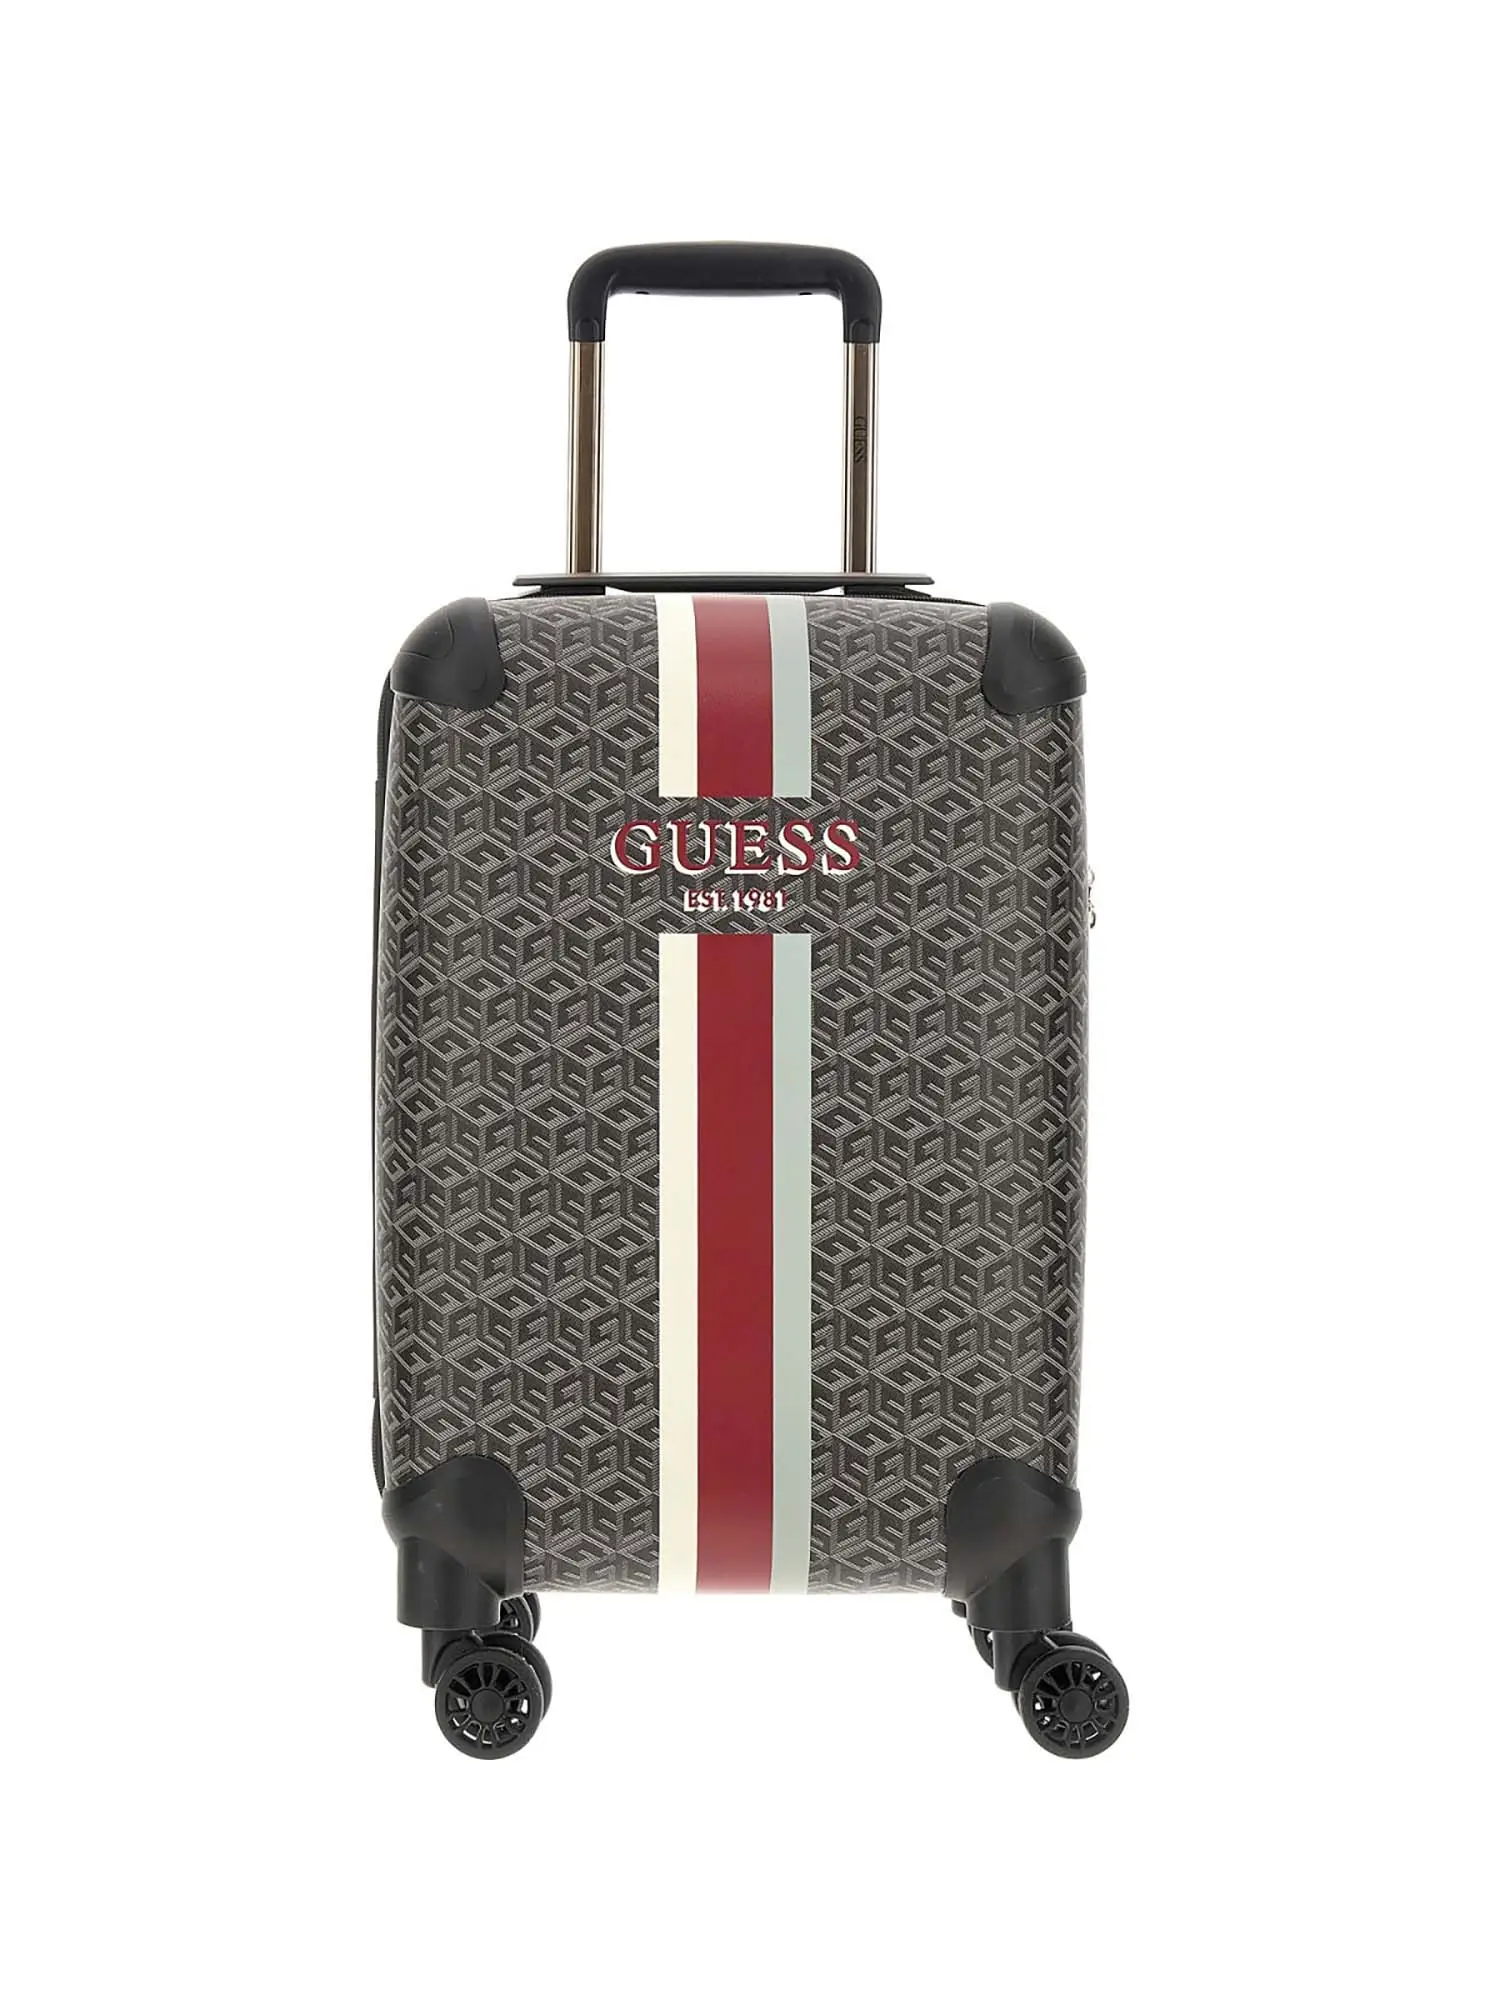 TROLLEY VALIGERIA UNISEX - GUESS - TWS745 29830 - CARBONE, UNICA